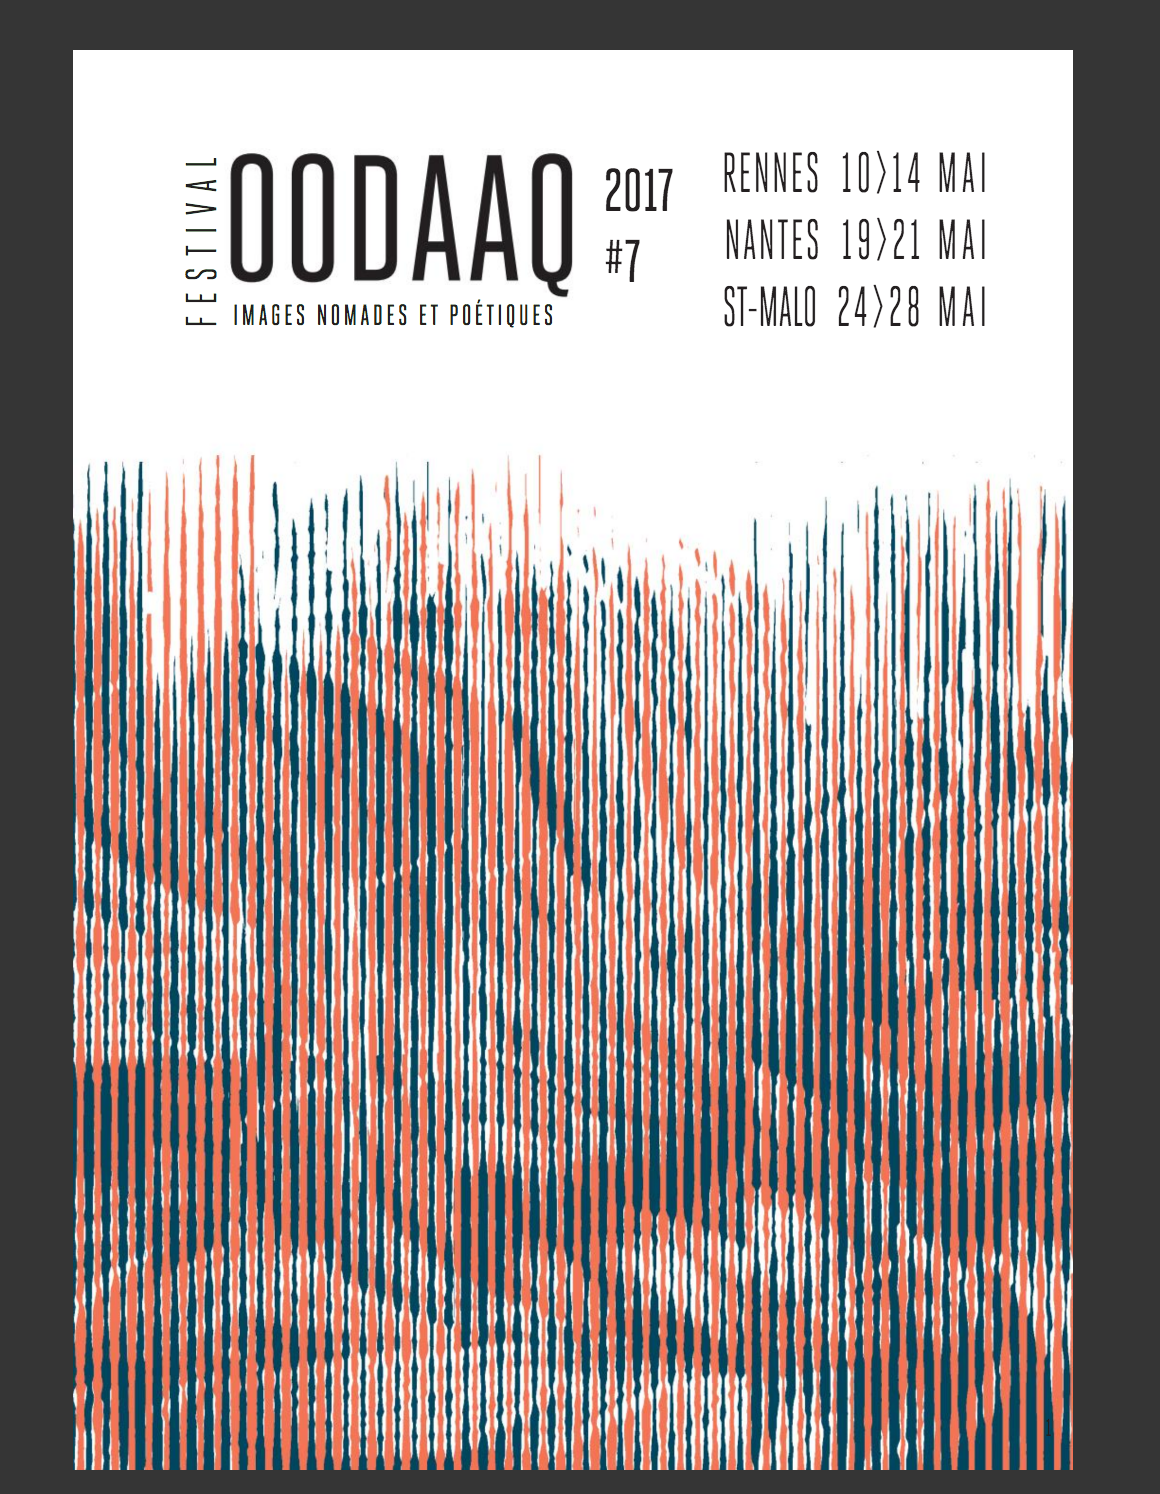 Best of the OODAAQ FESTIVAL, Rennes, Nantes, St. Malo From 28 of June to 25 of July 2017 only on VisualcontainerTV www.visualcontainer.tv